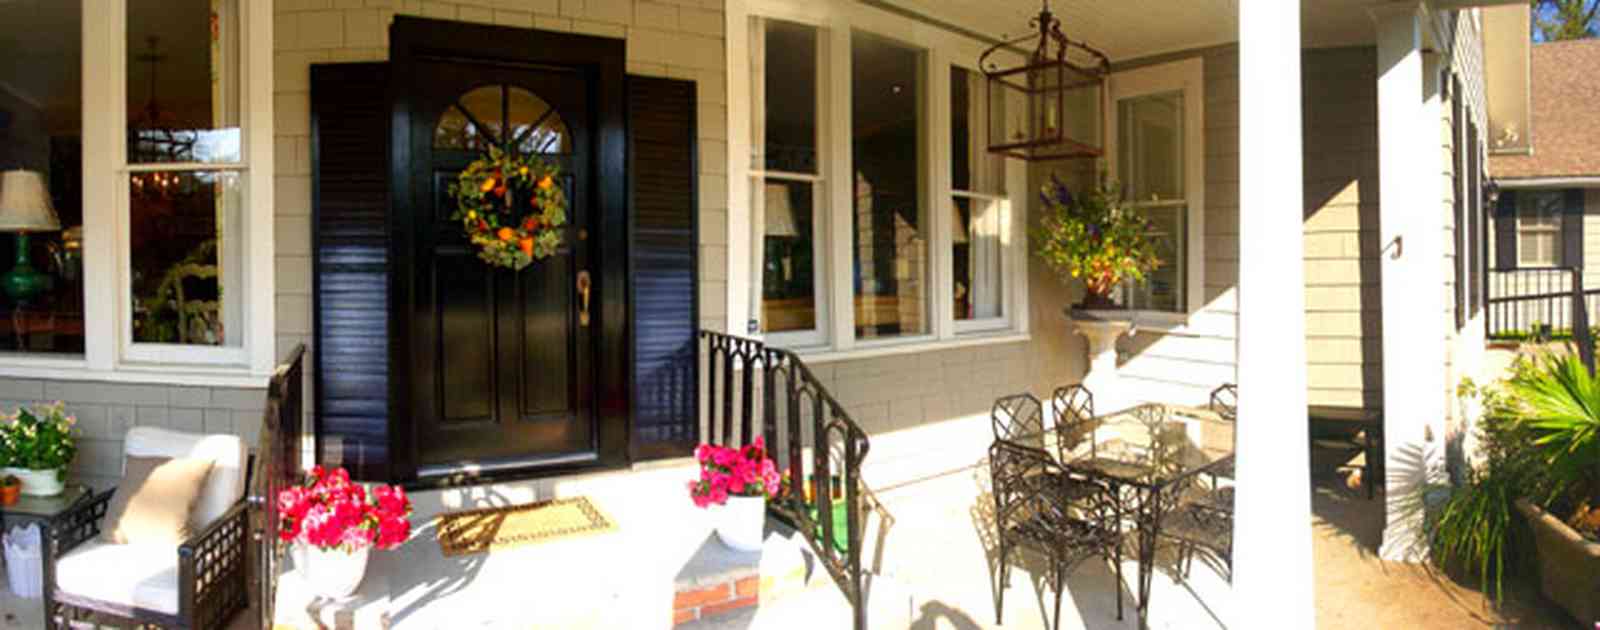 East-Hill:-McAlpin-Shop_05.jpg:  porch, traditional style, colonial style home, shutters, 